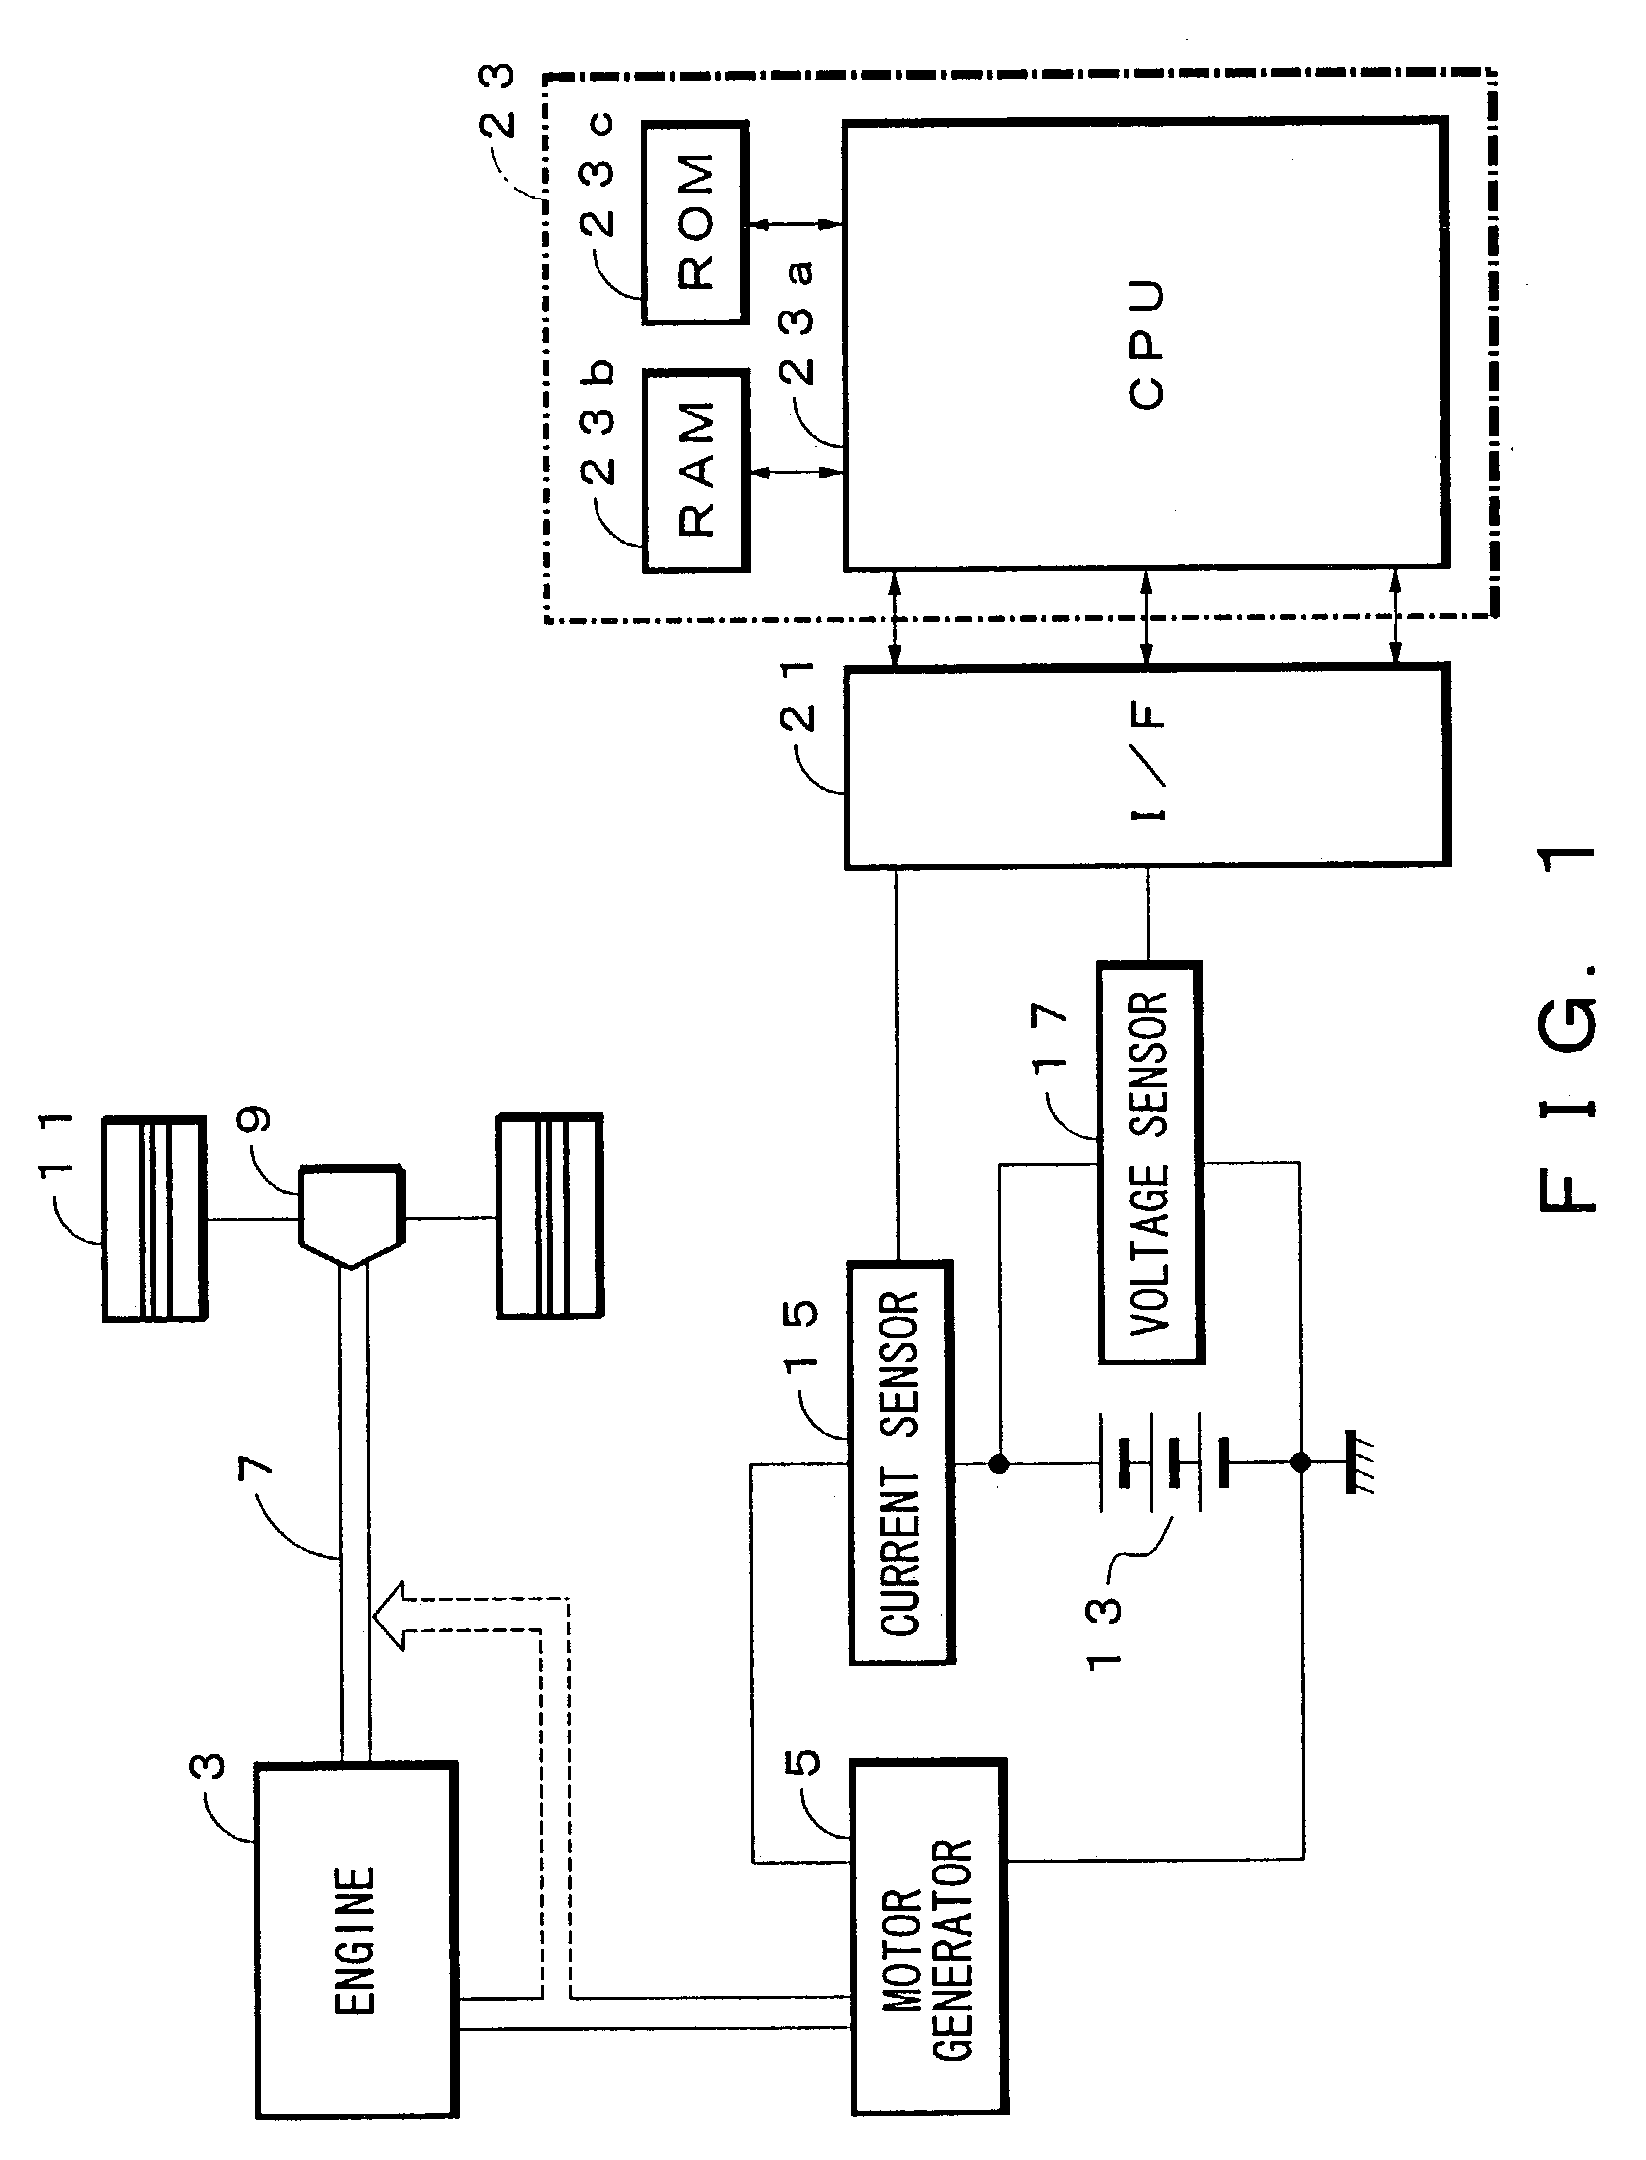 Battery status monitoring apparatus which monitors internal battery resistance, saturation polarization detecting method and dischargeable capacity detecting method